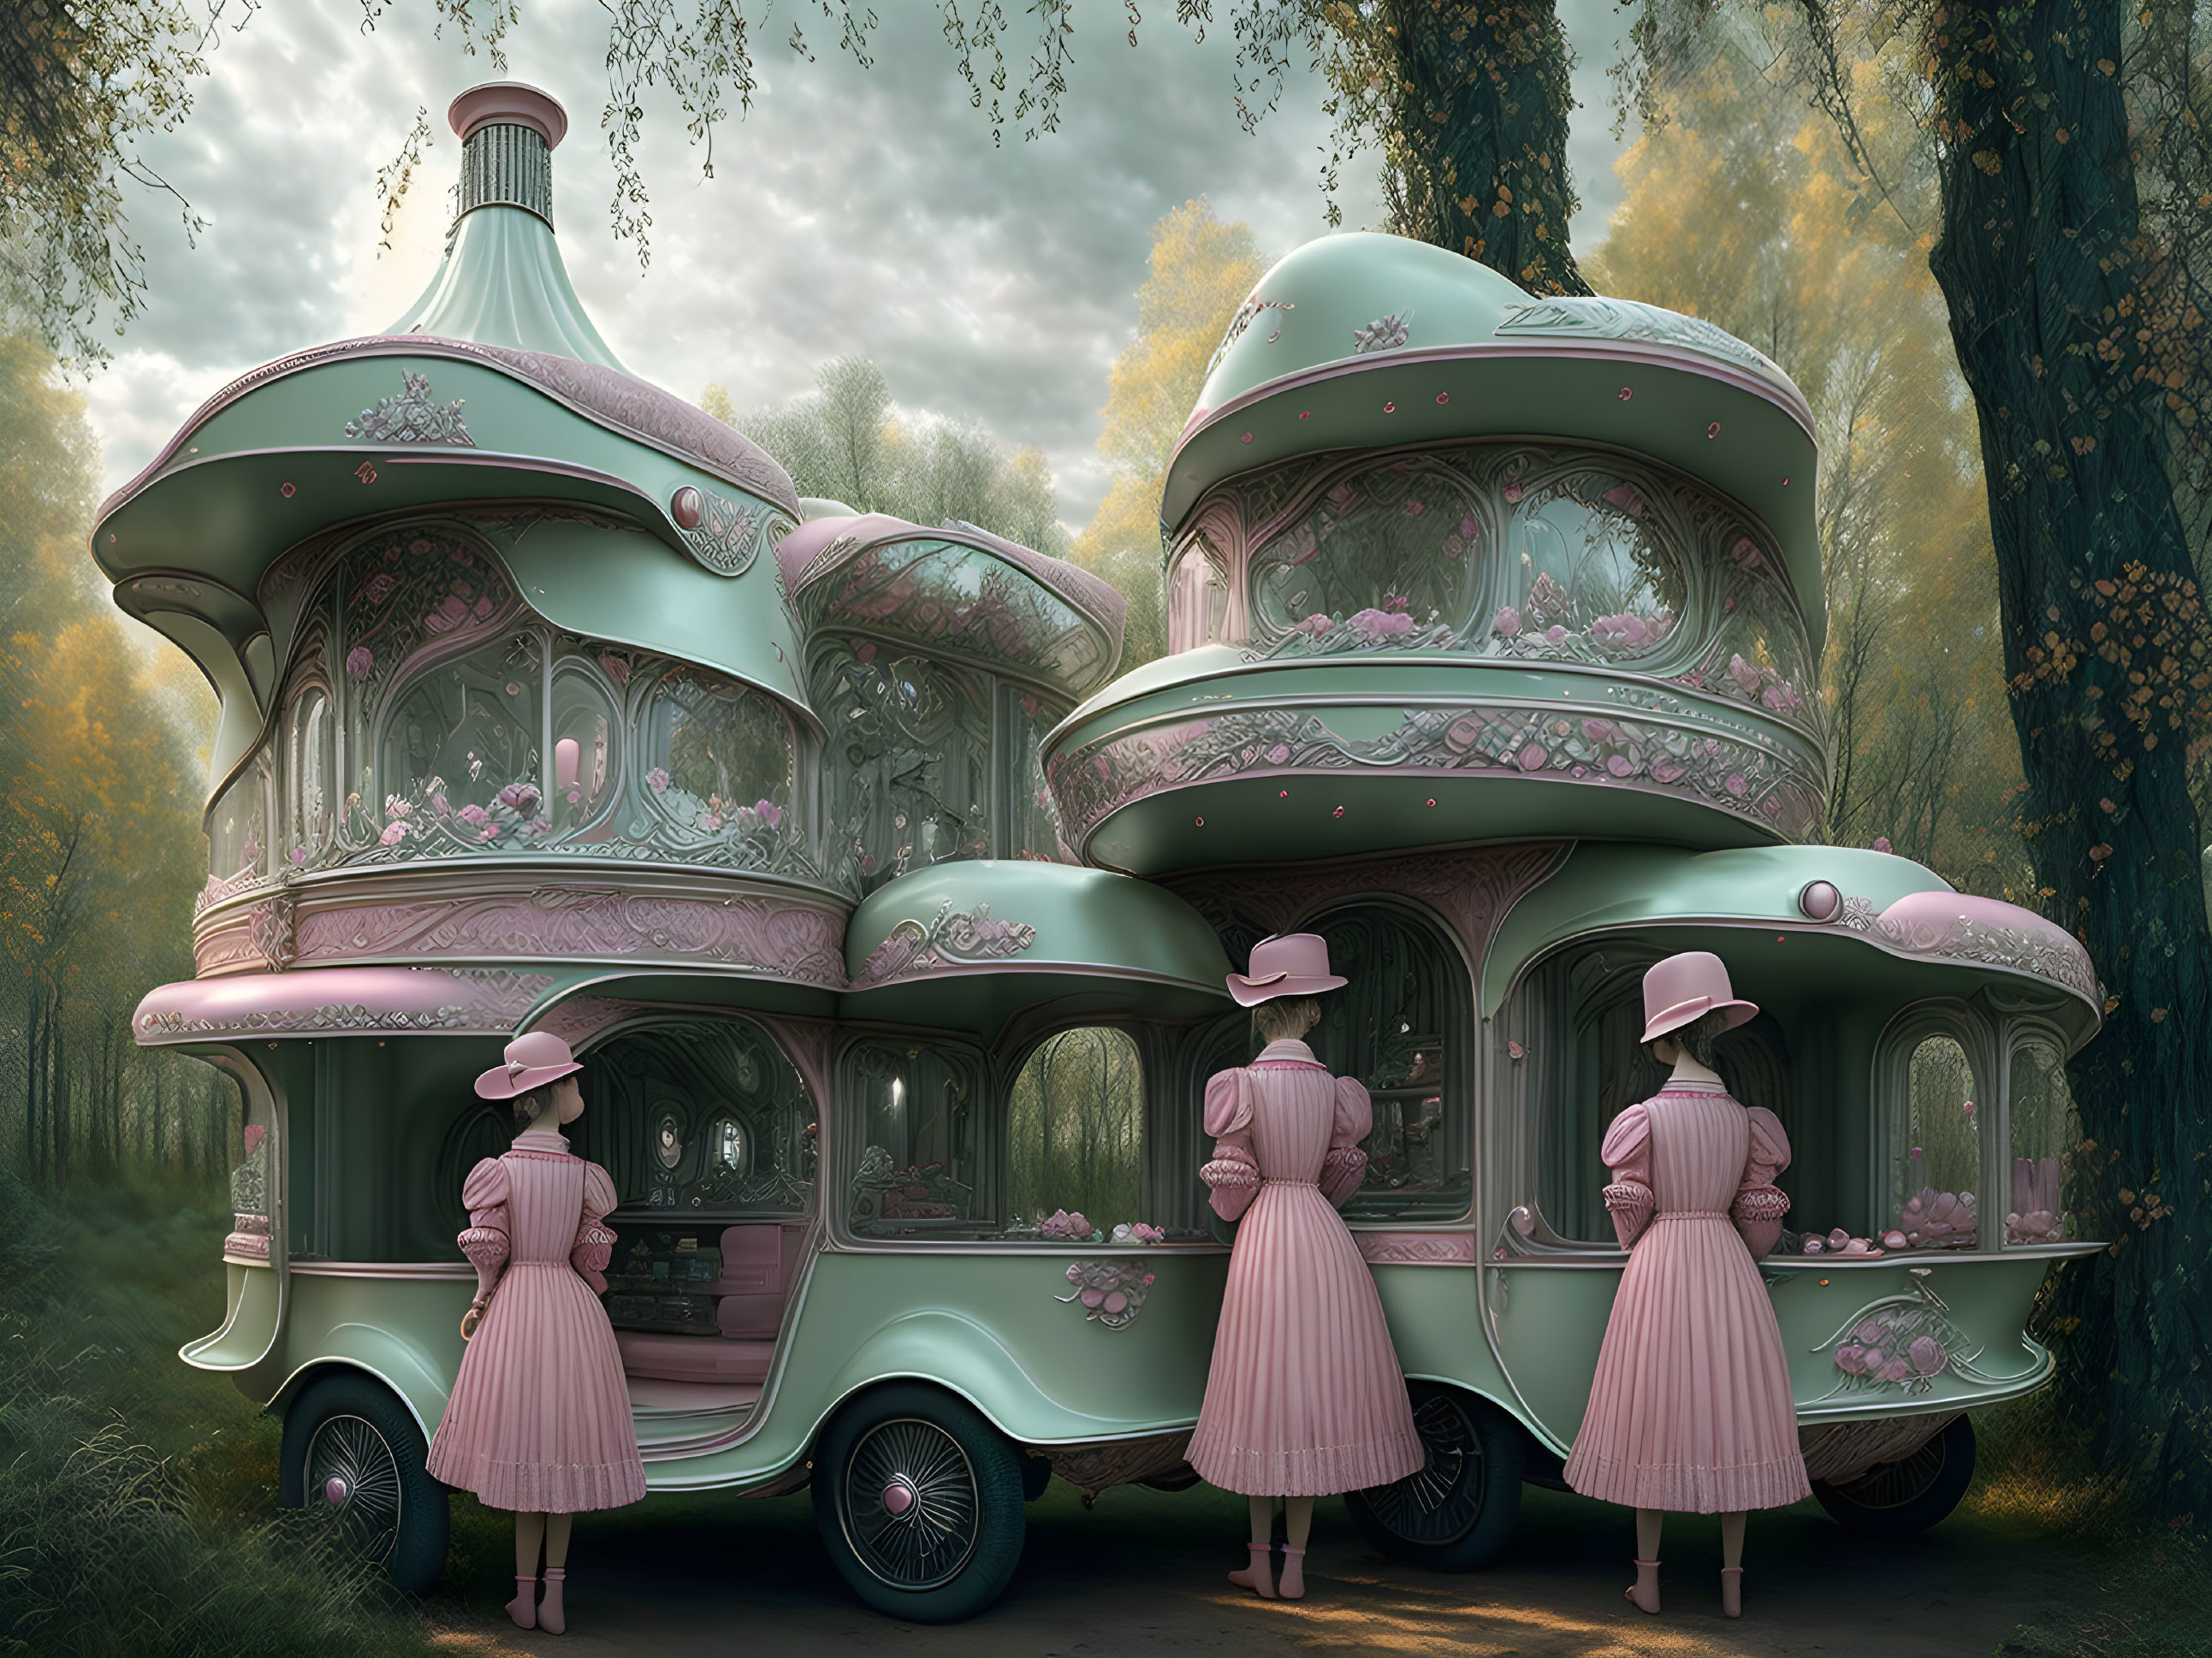 Victorian-style Green Carriages in Mystical Forest with Women in Period Clothing